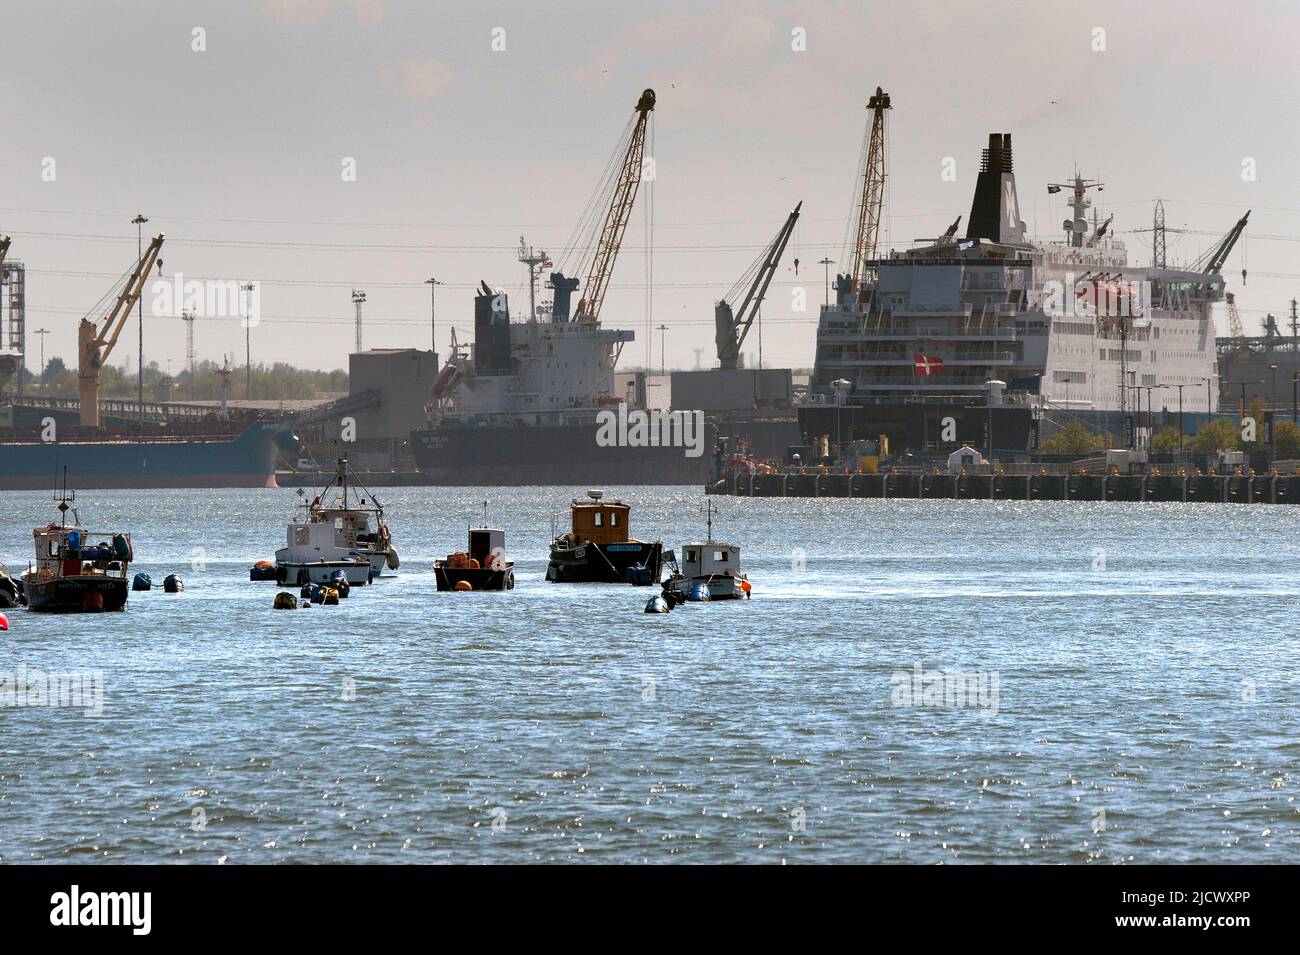 View of fishing boats, cargo ships and ferry on River Tyne, Taken from North Shields fishquay Stock Photo